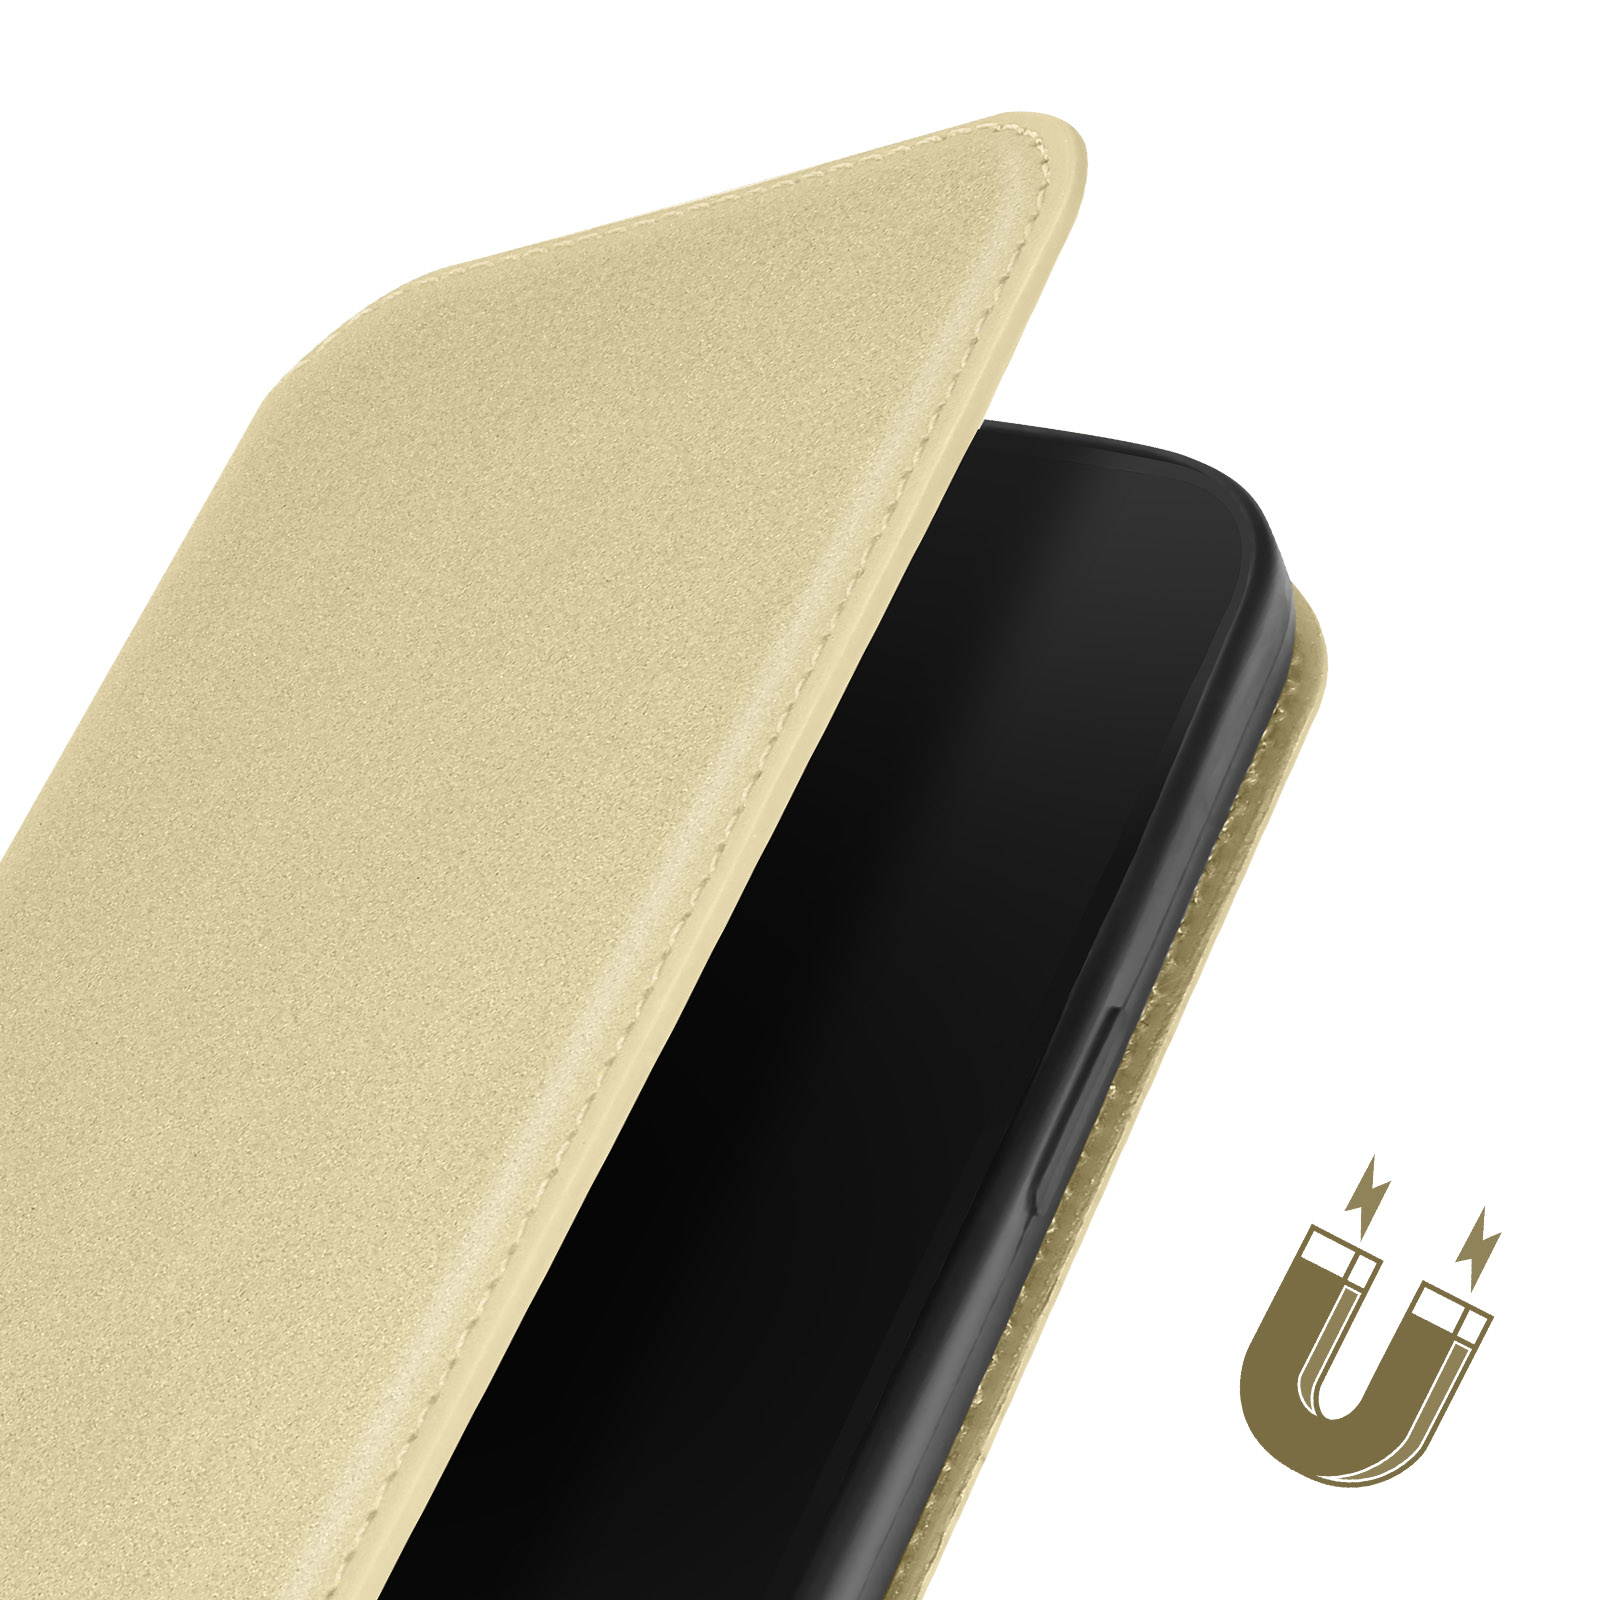 Bookcover, Gold Pockets 14 Max, AVIZAR iPhone Series, Apple, Pro Dual